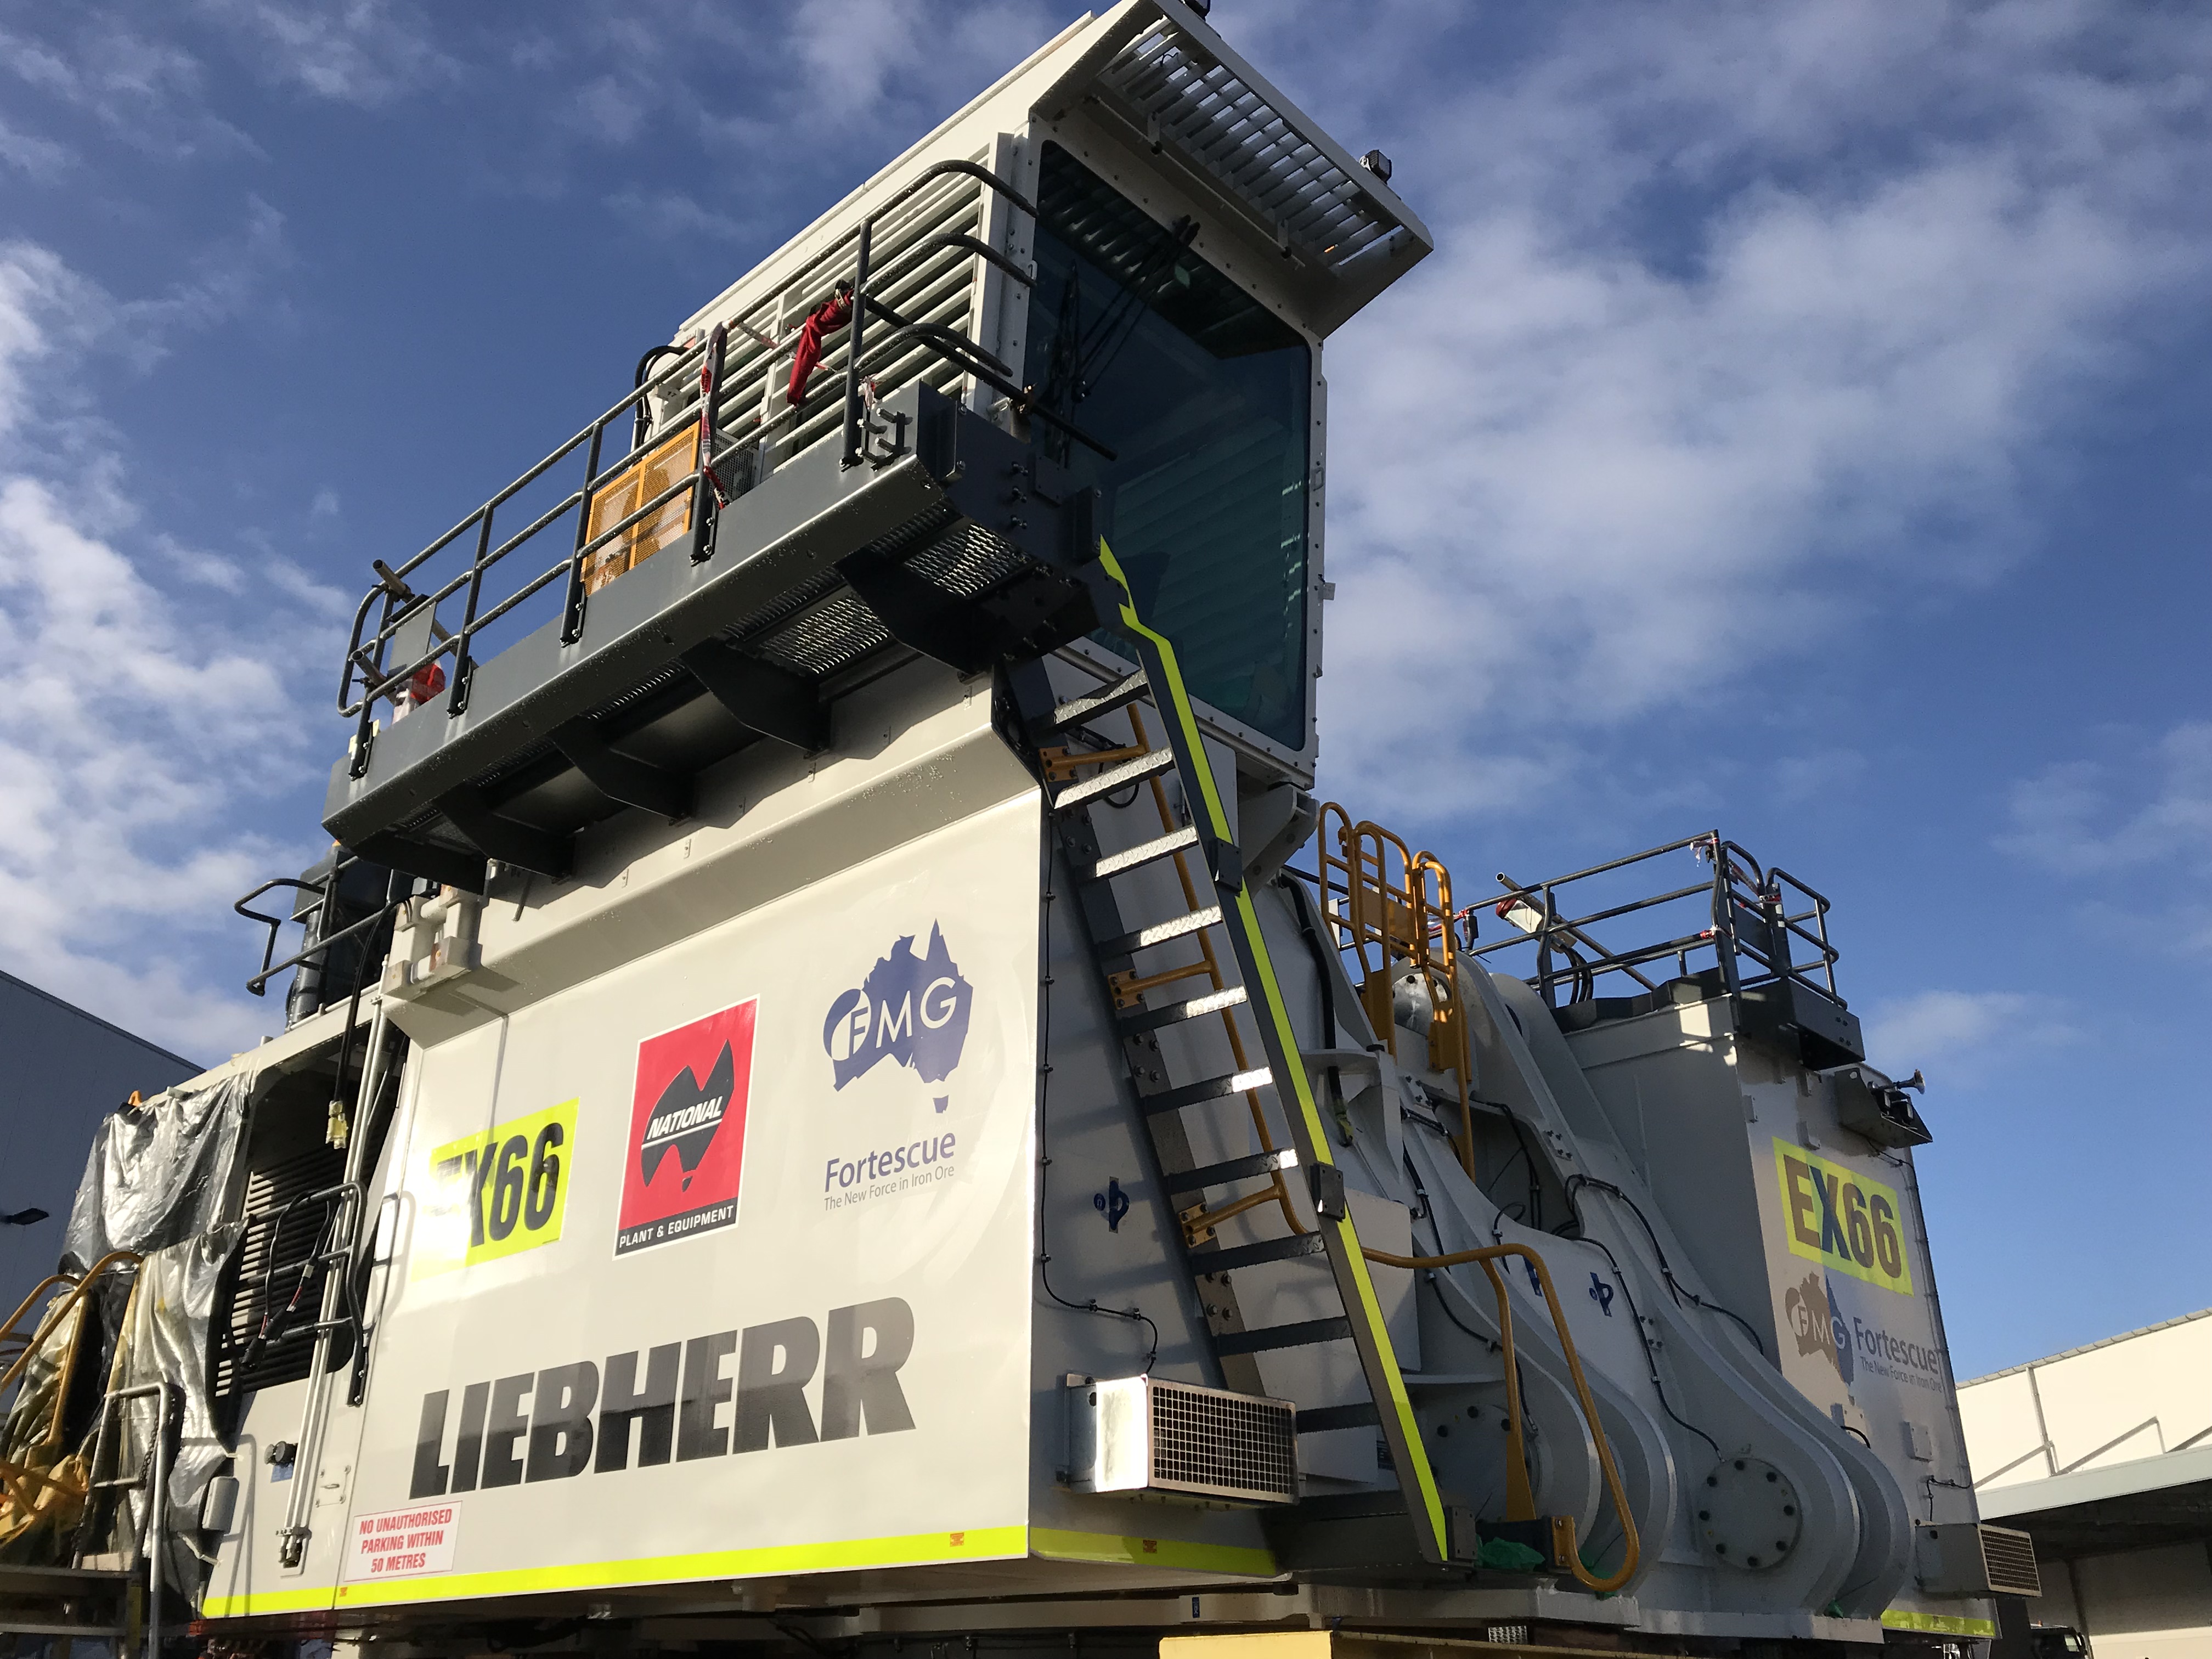 National Group, National Plant & Equipment, Liebherr R996B Excavator, FMG Fortescue Metals